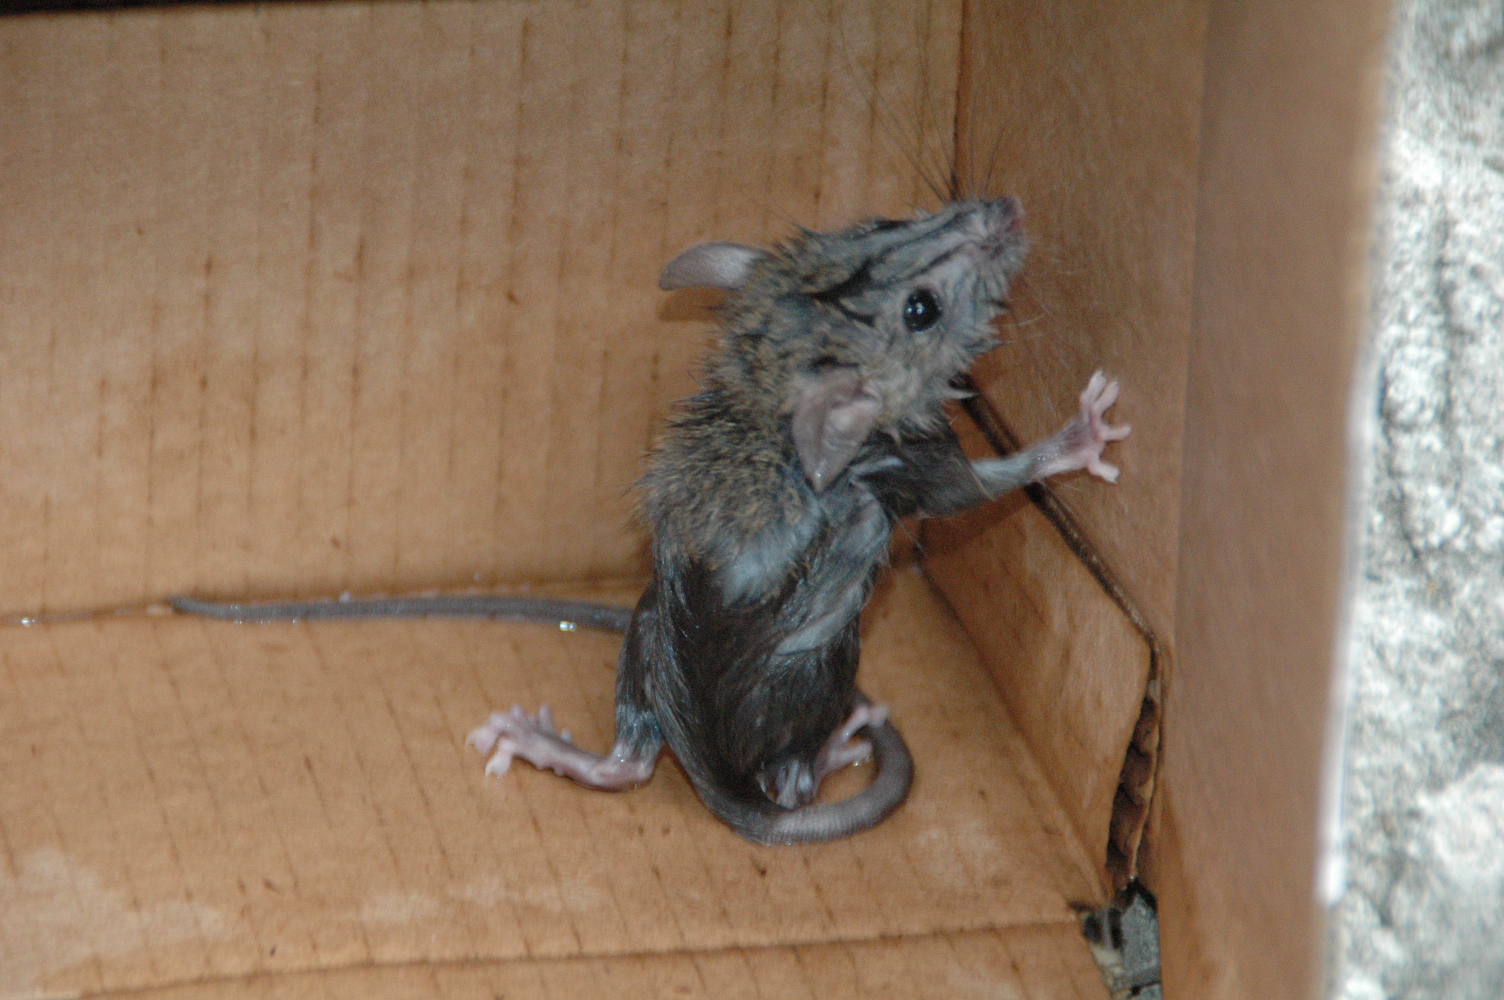 a gray mouse climbing up the side of a wooden bench